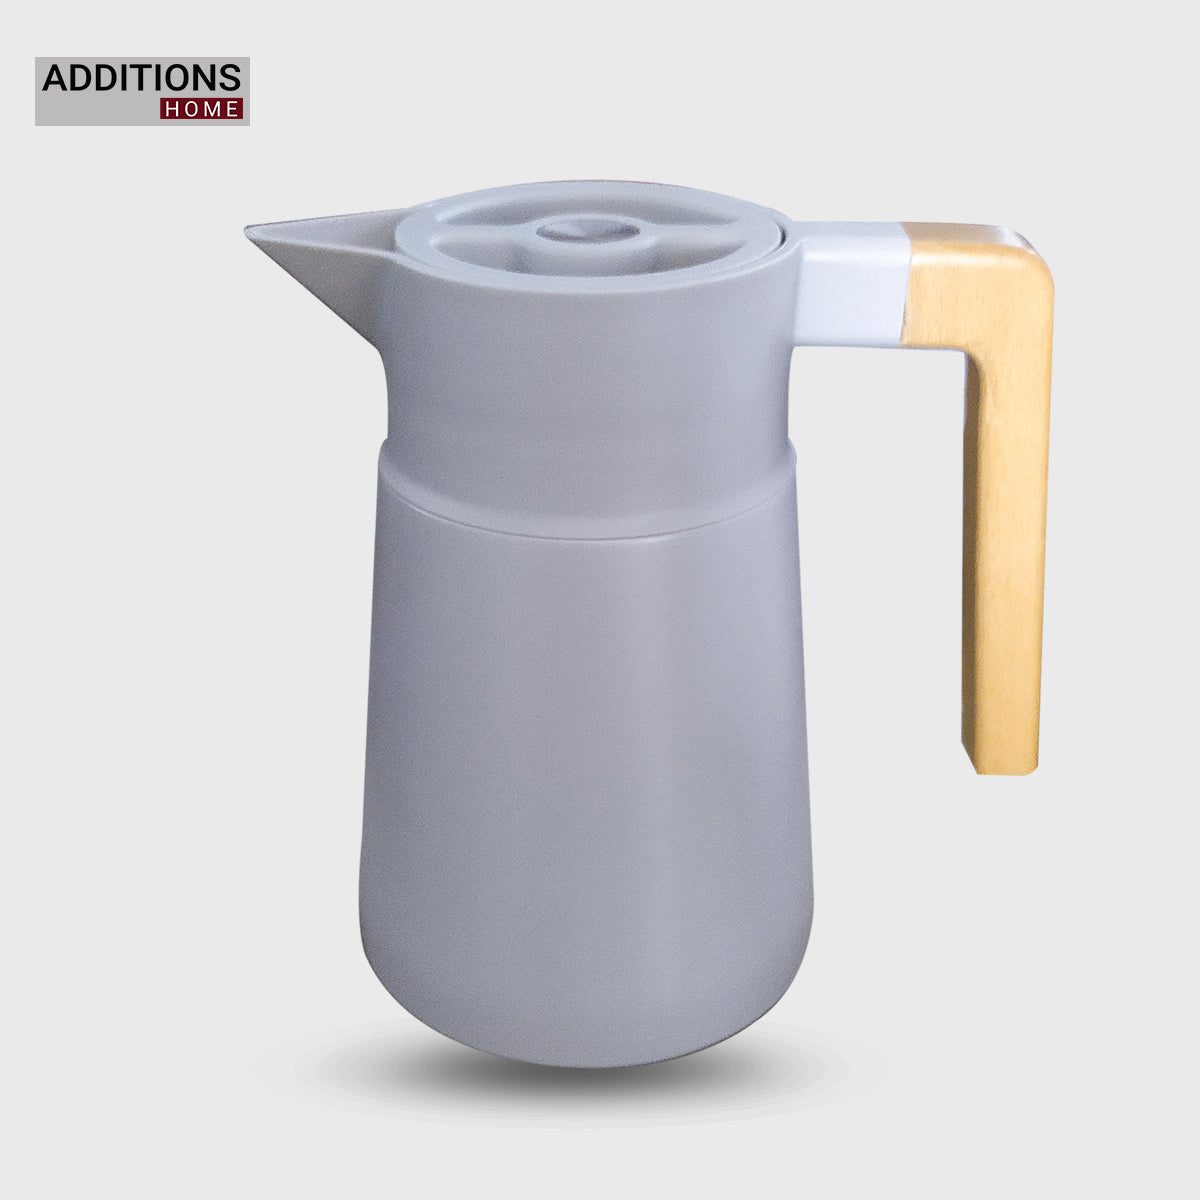 Stainless Steel Vacuum Jug with Wooden Handle - 1.5 Ltr.